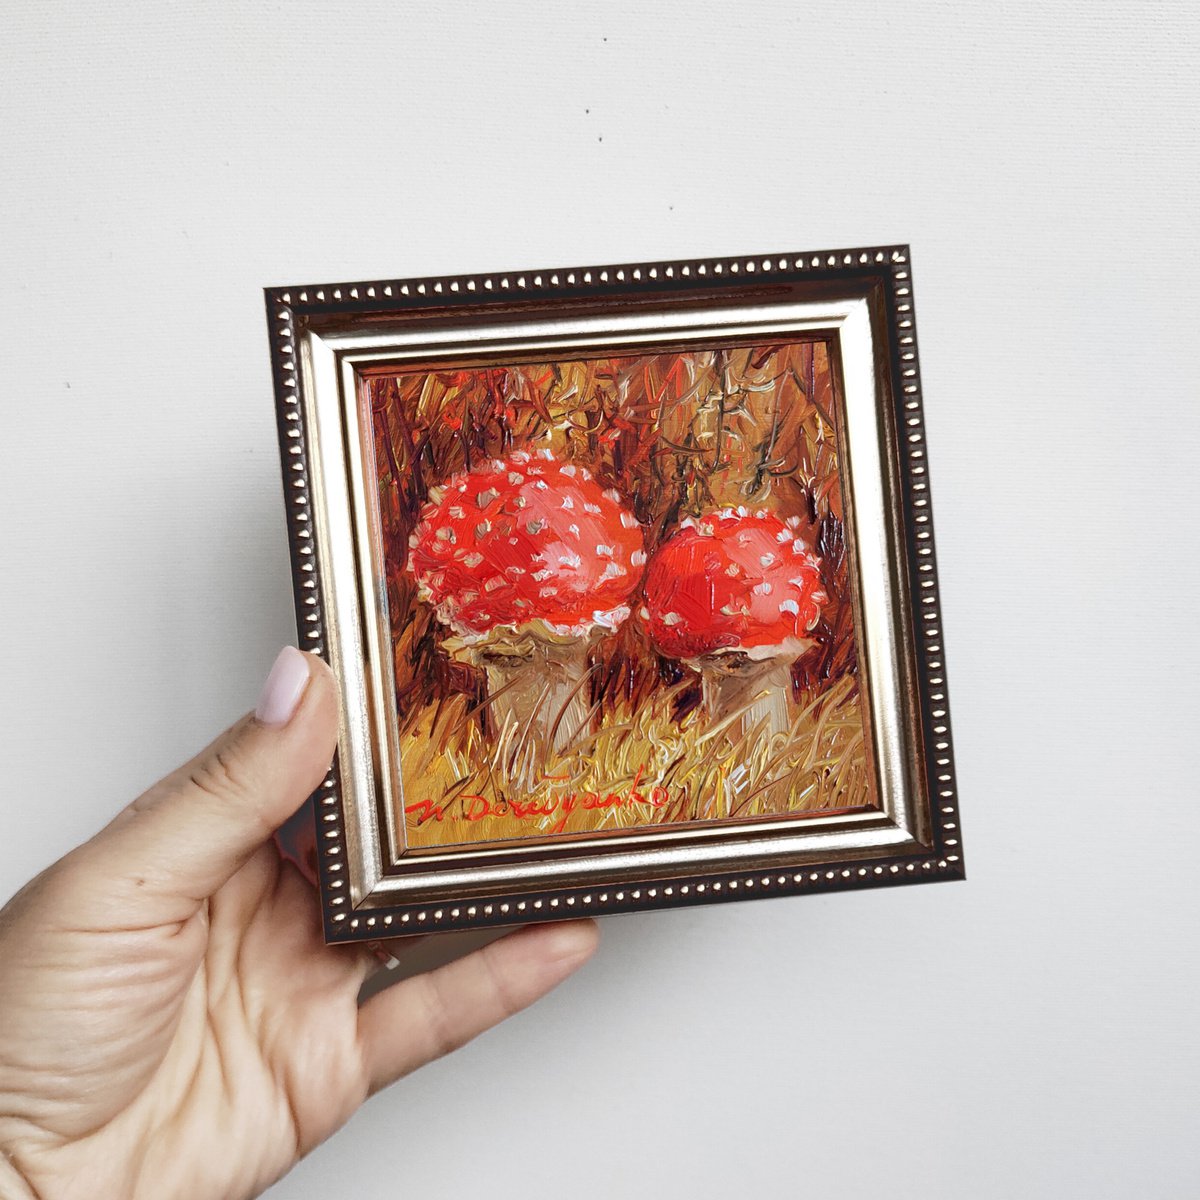 Fly agaric artwork two red mushroom oil painting original 4x4 small framed art, Thank you... by Nataly Derevyanko